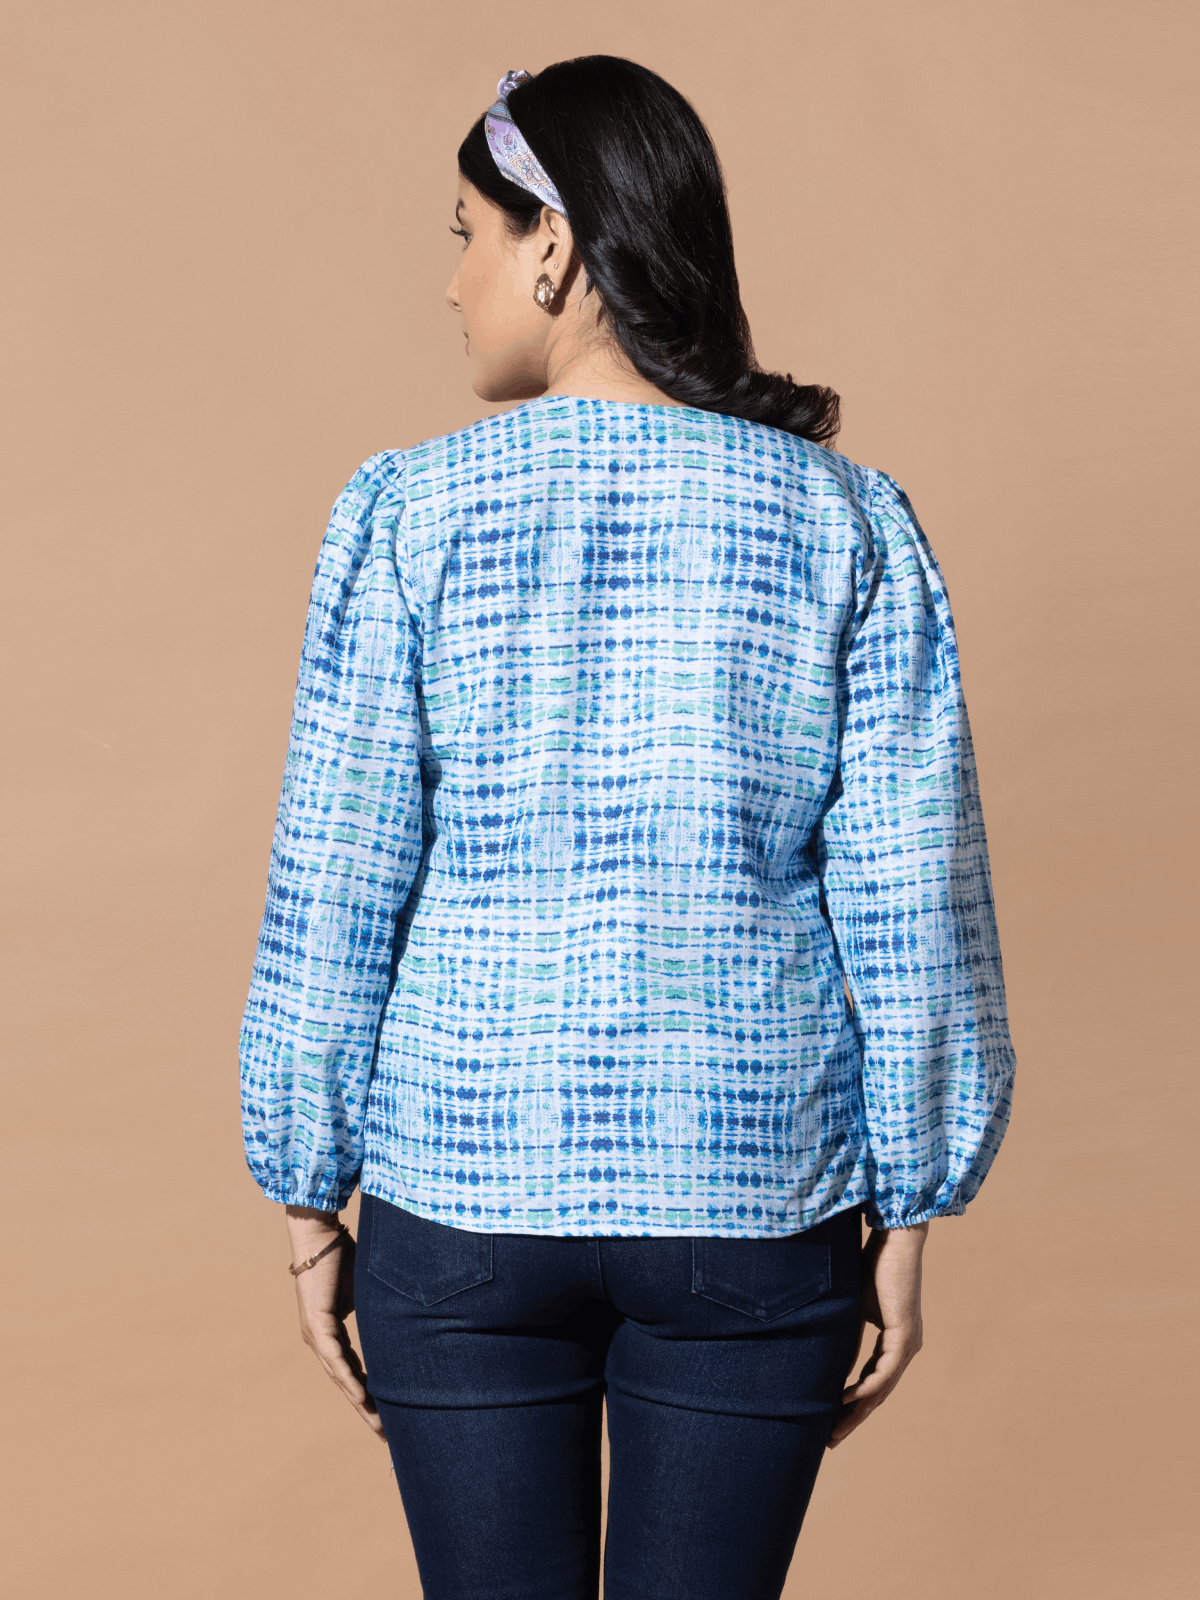 Shop Now Blue White And Knot Rob Style Top From Octics At Rs 1199 | OCTICS